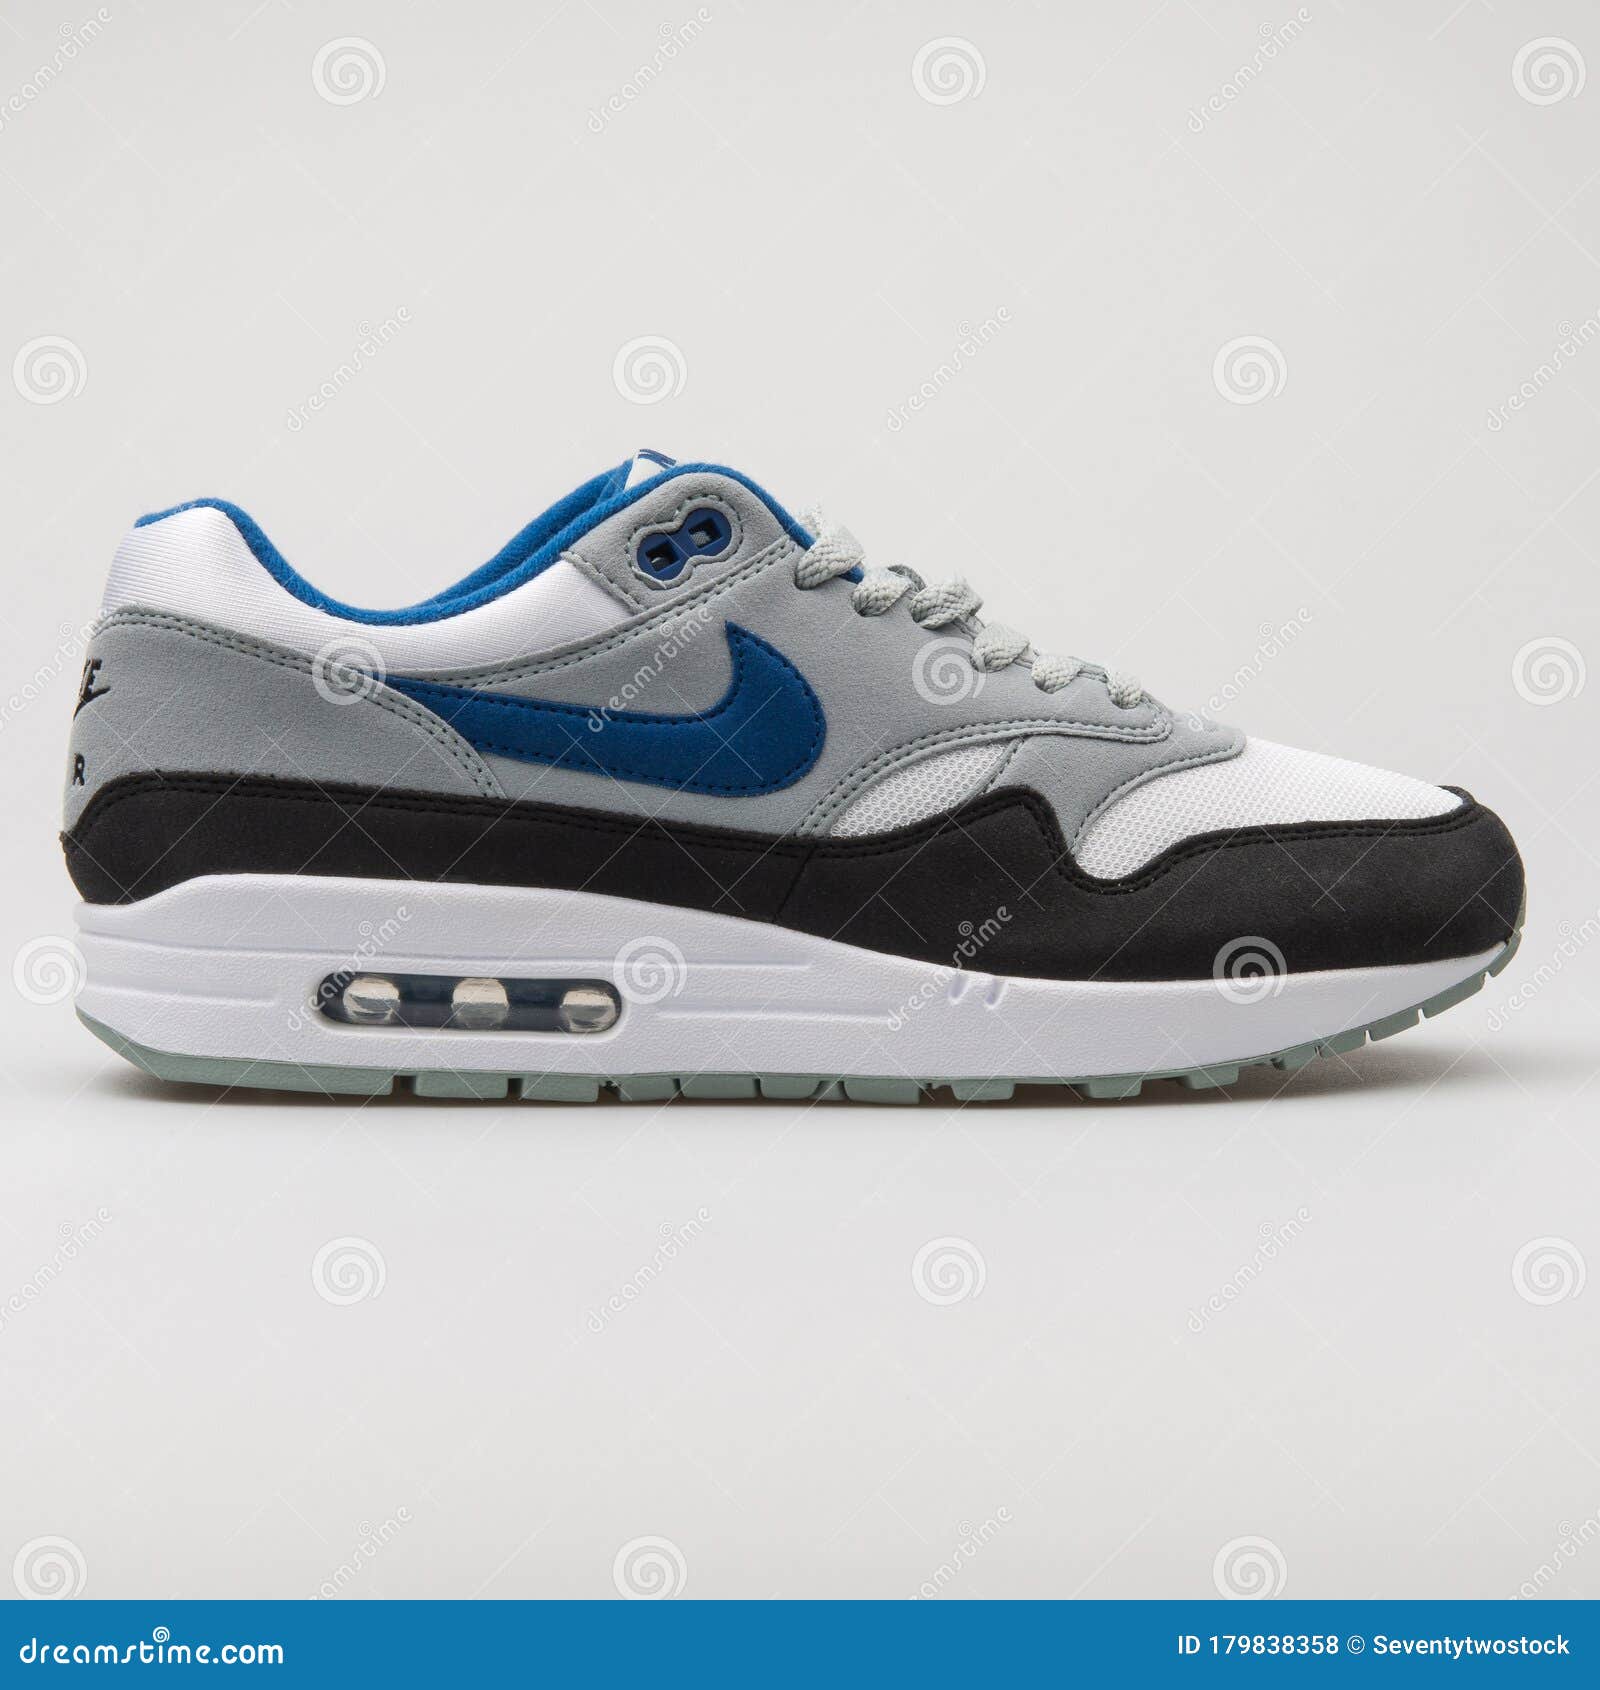 Nike Air Max Premium White, Blue, Grey and Sneaker Editorial Stock Photo - Image of color, fitness: 179838358